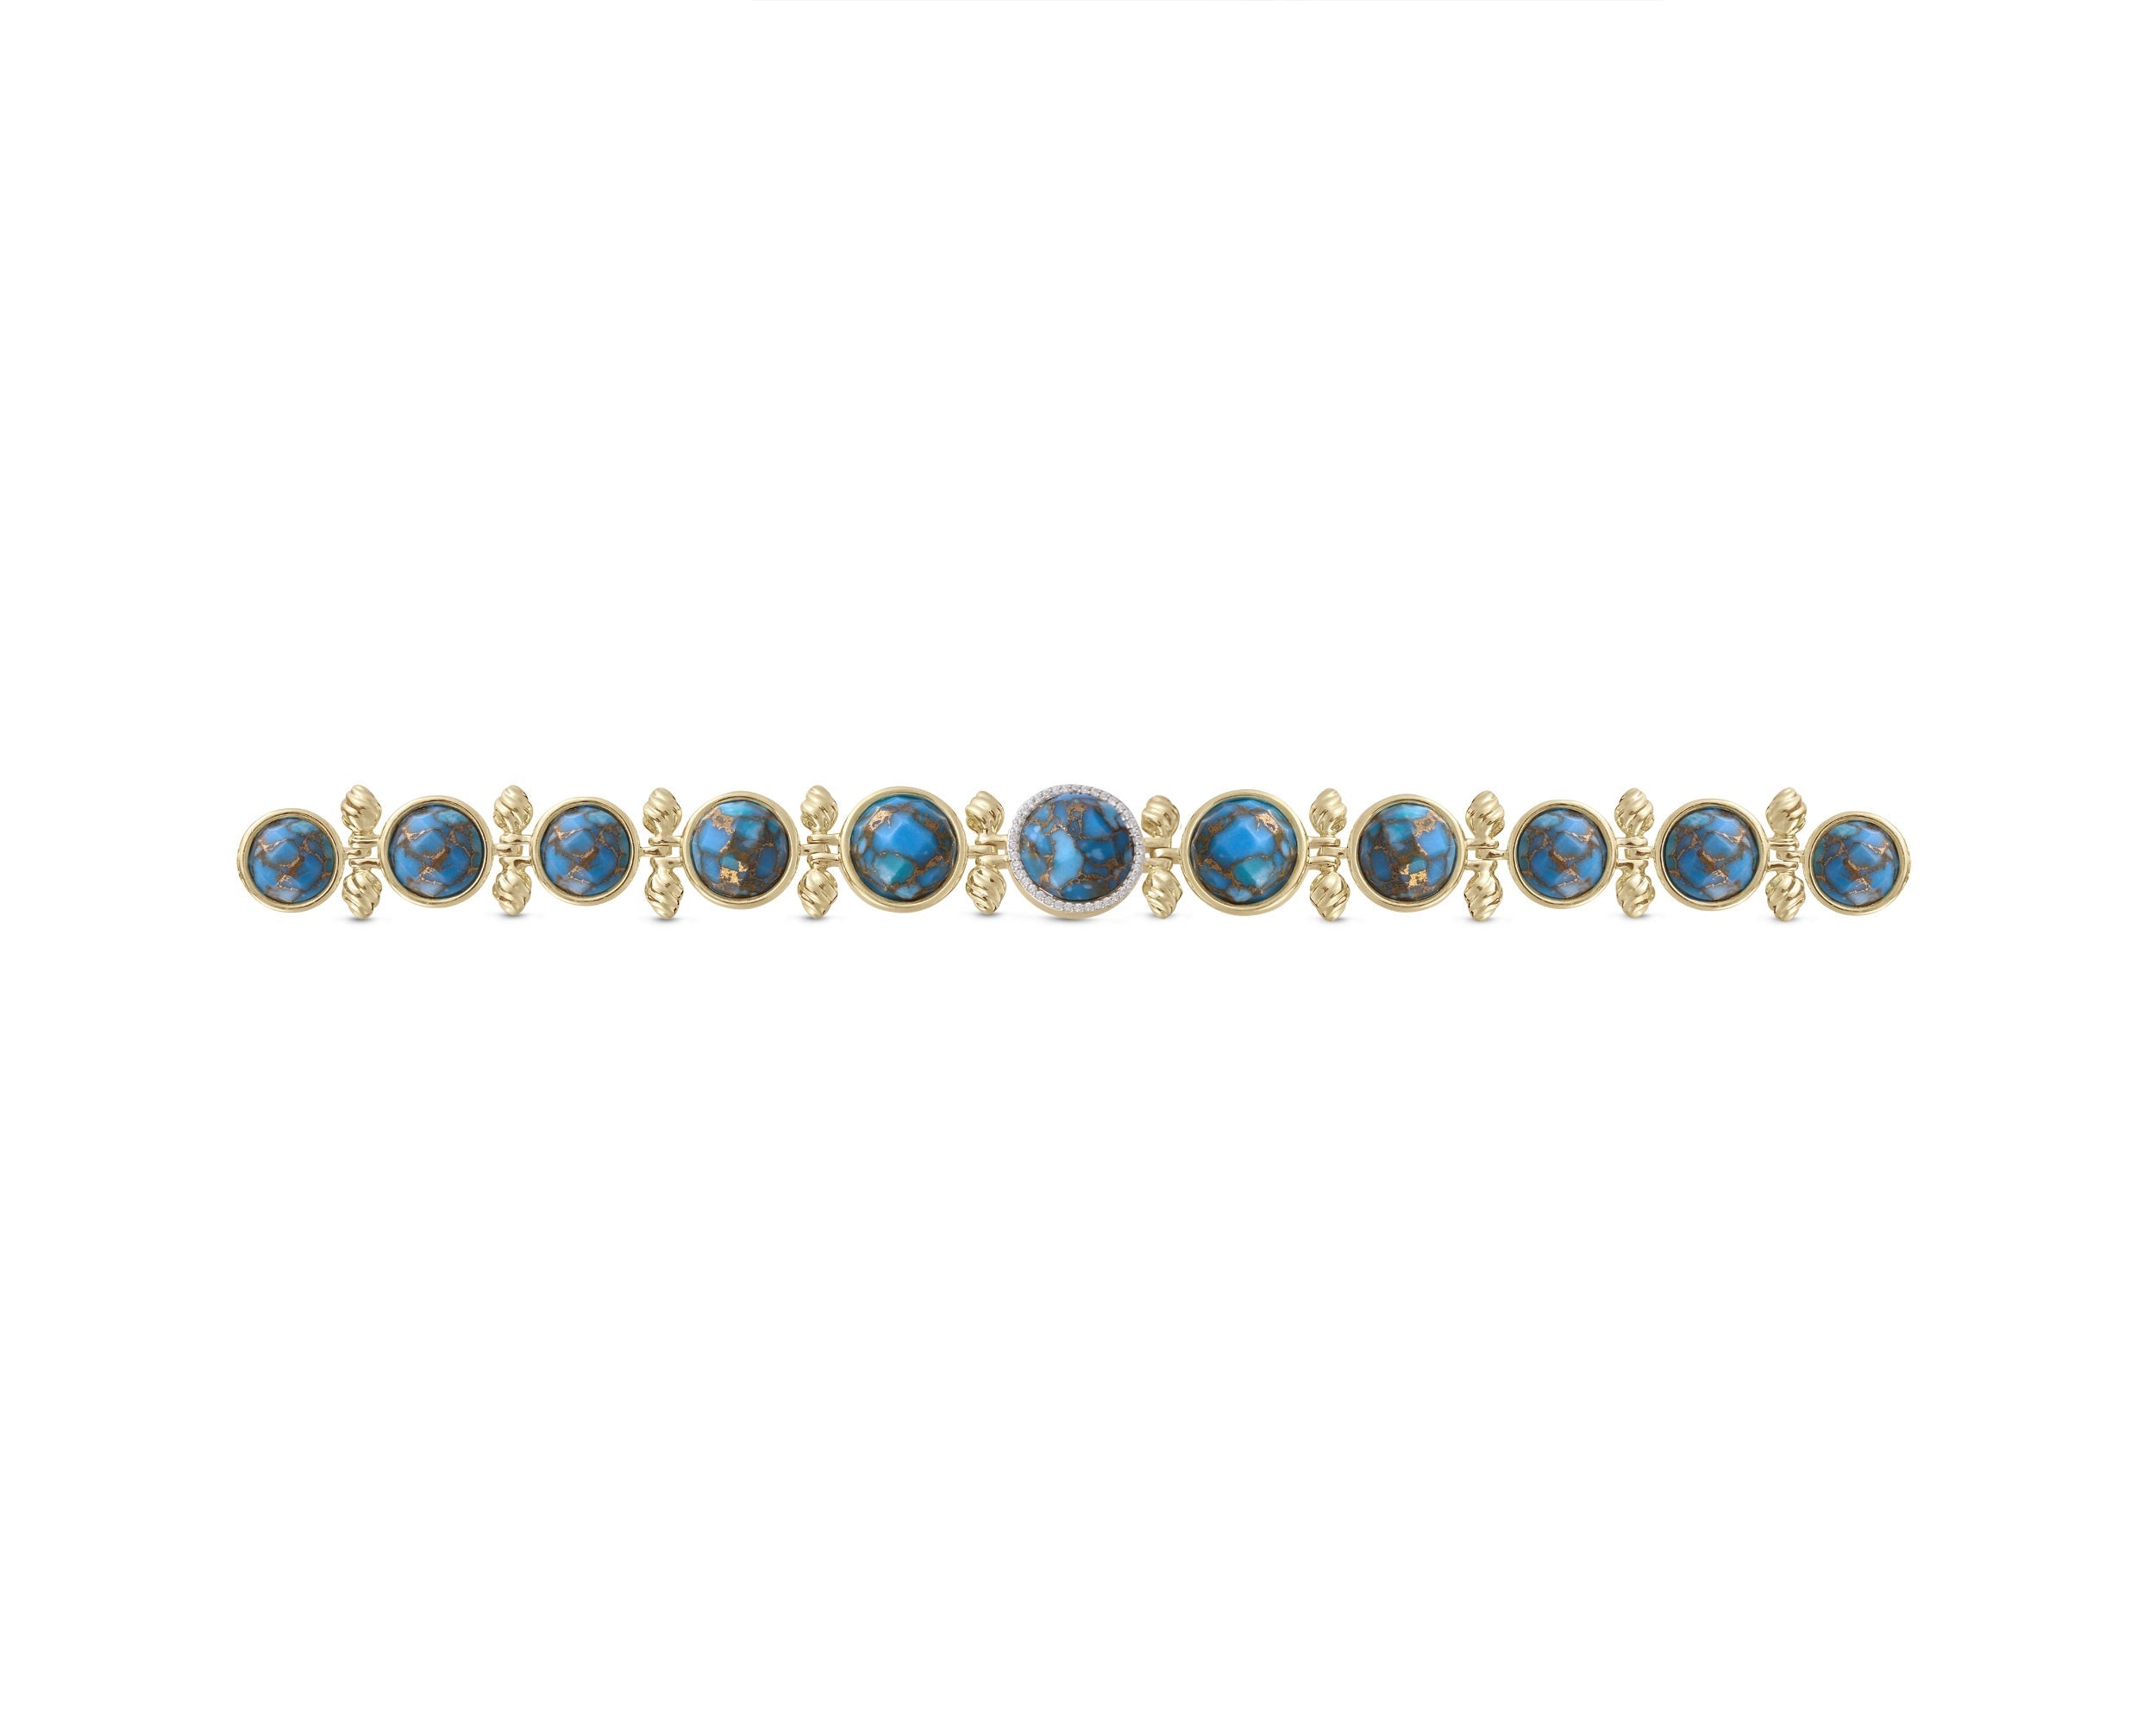 Turquoise & Diamond Summer Nights Bracelet in 14K Gold Plating - LMJ Sunshine Twist Collection - Jewelry & Watches - Bijou Her -  -  - 